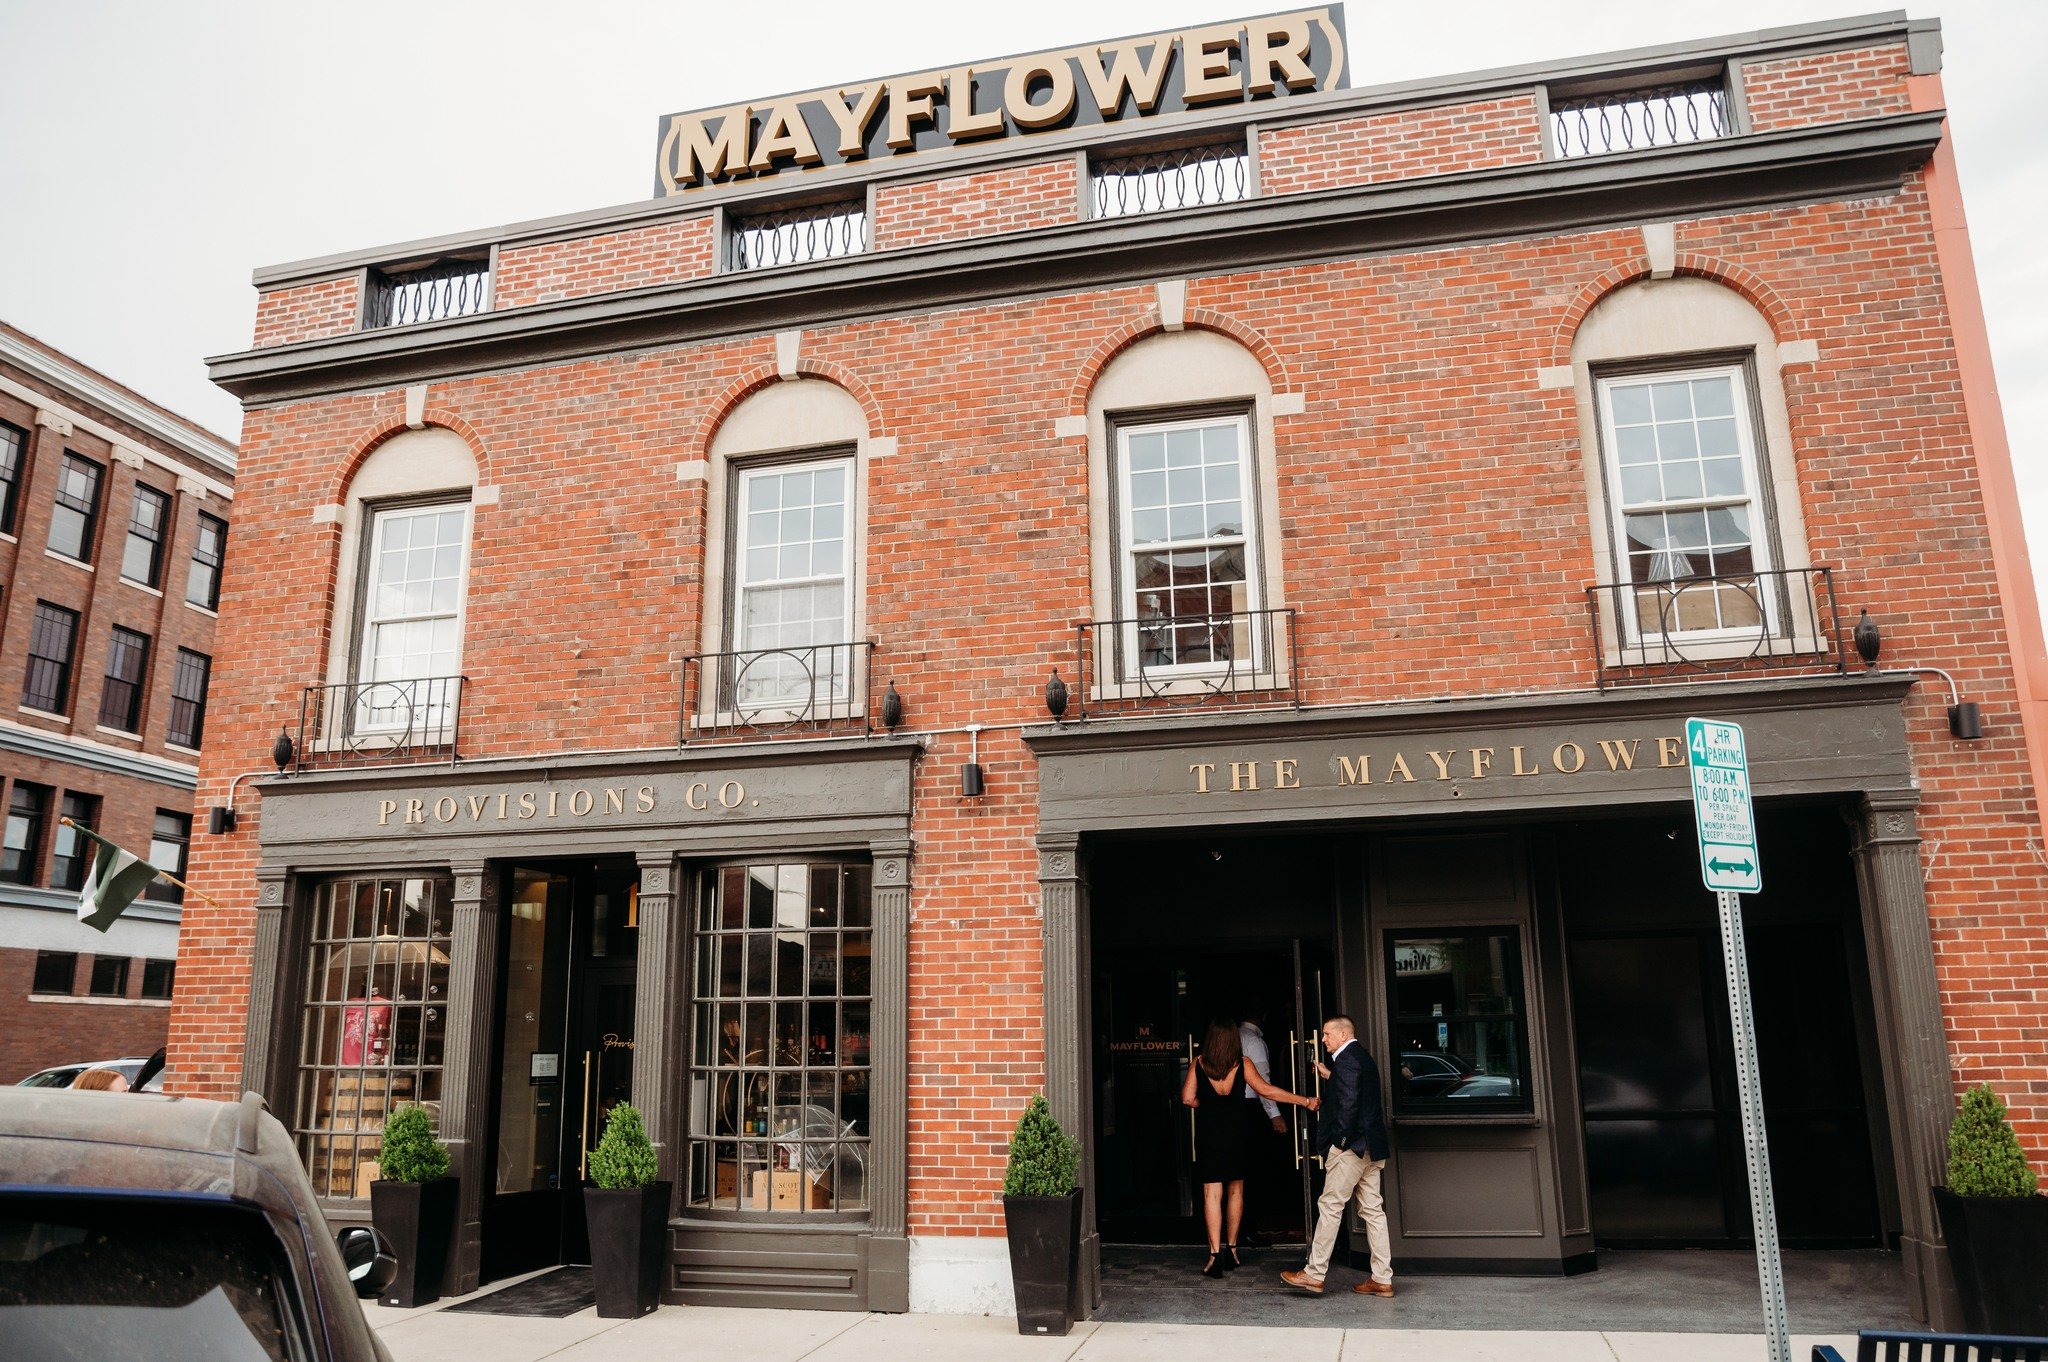 We have two weeks of Mayflower food and drink service under our belt now. Thanks to a great amount of feedback (the very good, the bad, and the ugly, too), we know there are areas we need to work on. Here are a few steps of service we are committed t